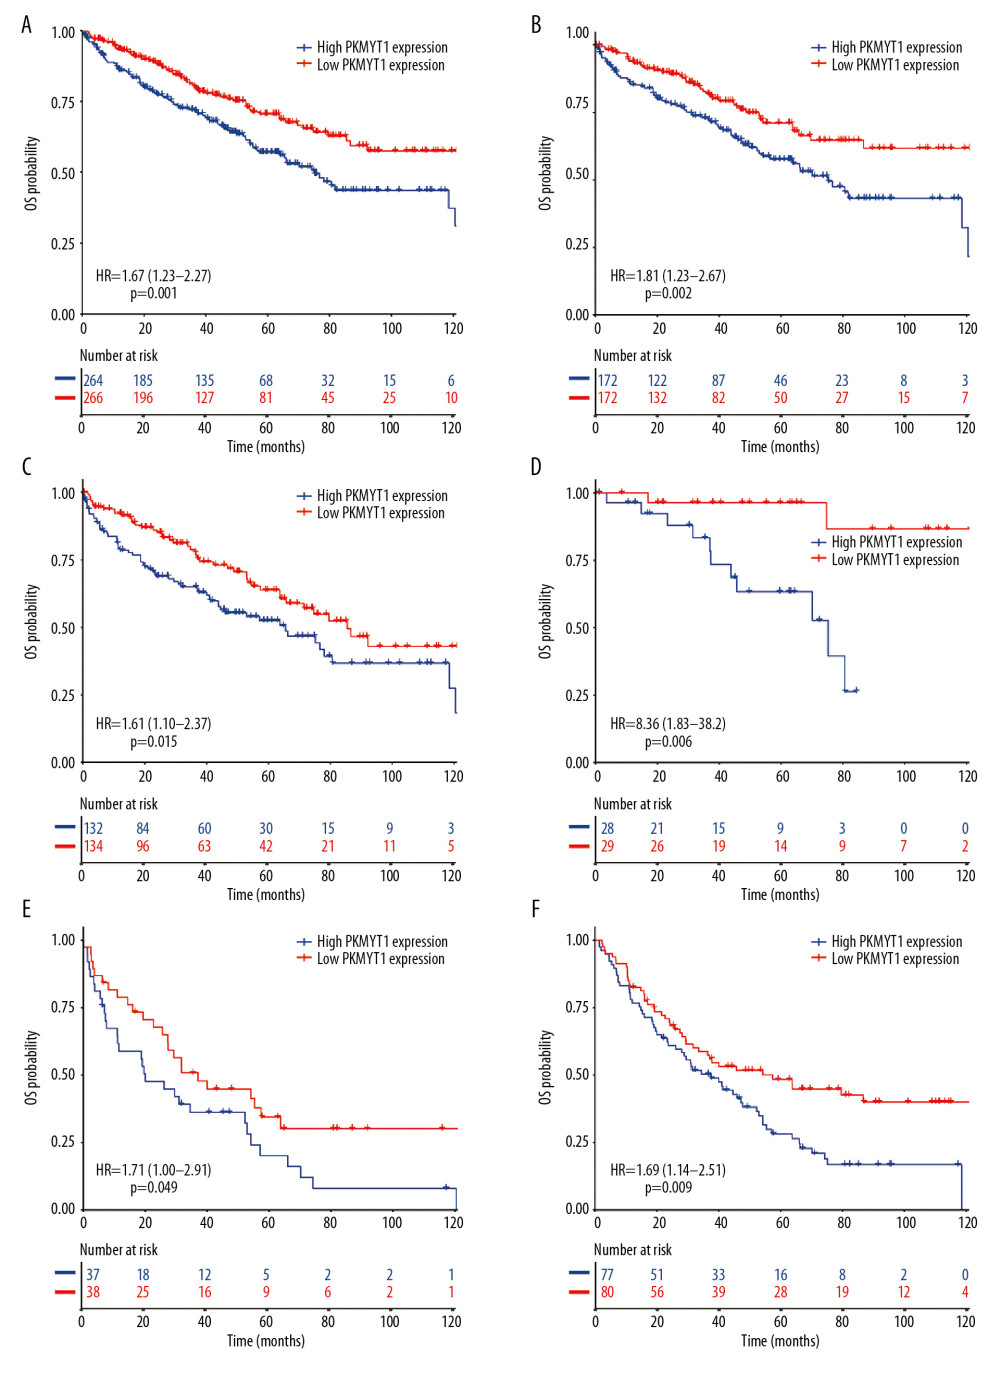 Overexpressed PKMYT1 exerts negative effects on ccRCC prognosis. Survival analysis reveals OS between high PKMYT1 and low PKMYT1 mRNA levels in (A) all ccRCC cases from the TCGA database, (B) male patients, (C) cases with age >60 years, (D) TNM stage II, (E) cases at histological grade 4, and (F) ccRCC that has relapsed. ccRCC – clear cell renal cell carcinoma; OS – overall survival; TCGA – The Cancer Genome Atlas; TNM, tumor, node, metastasis.